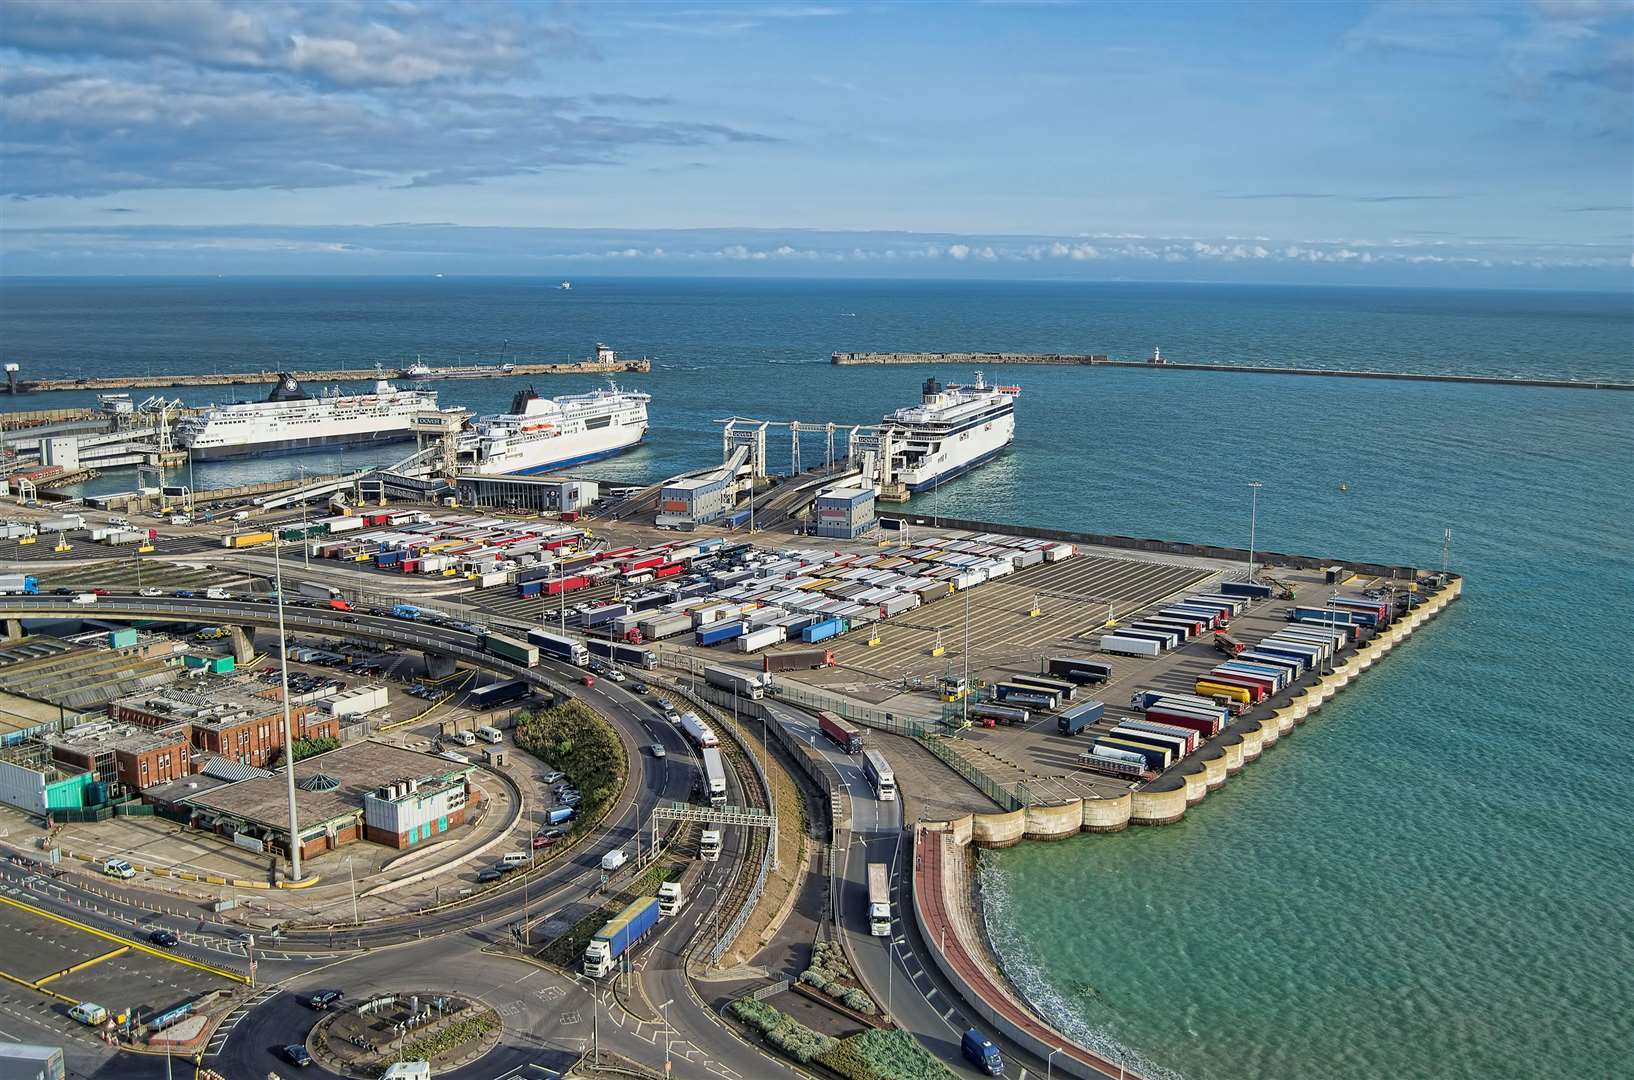 Dover will be used for filming of a new show starring Tom Felton